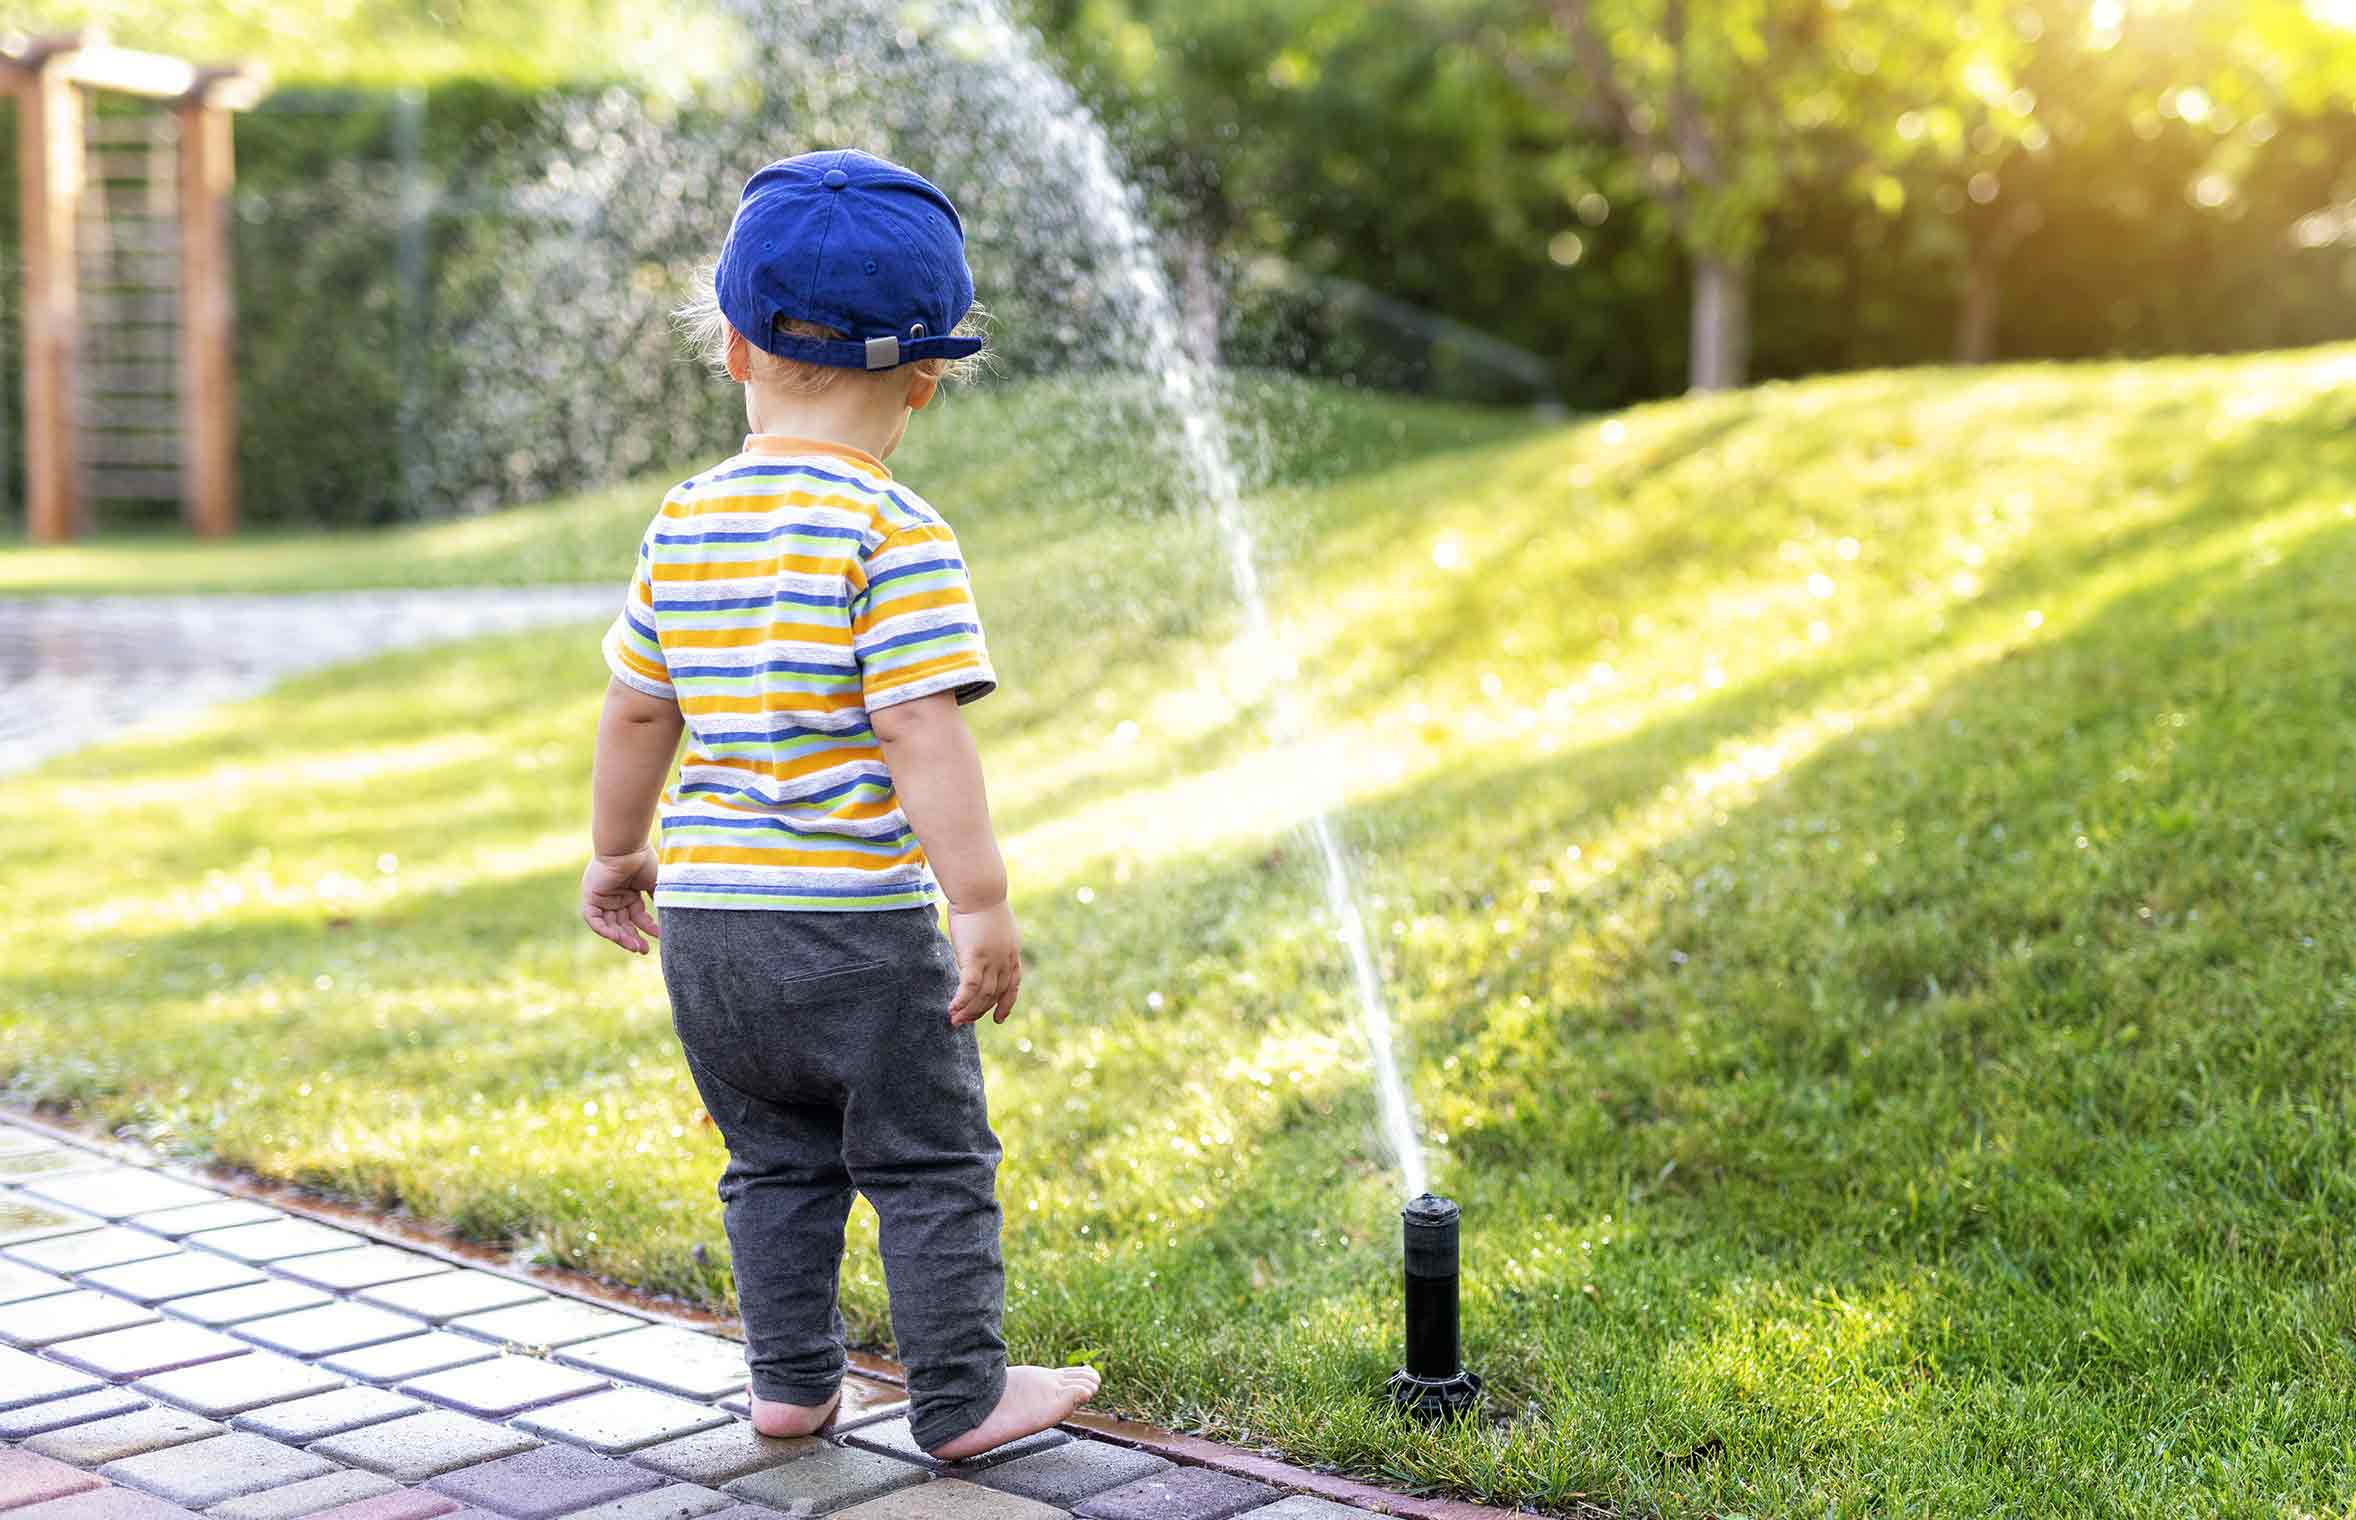 young boy looking at automatic sprinklers irrigating a front yard lawn